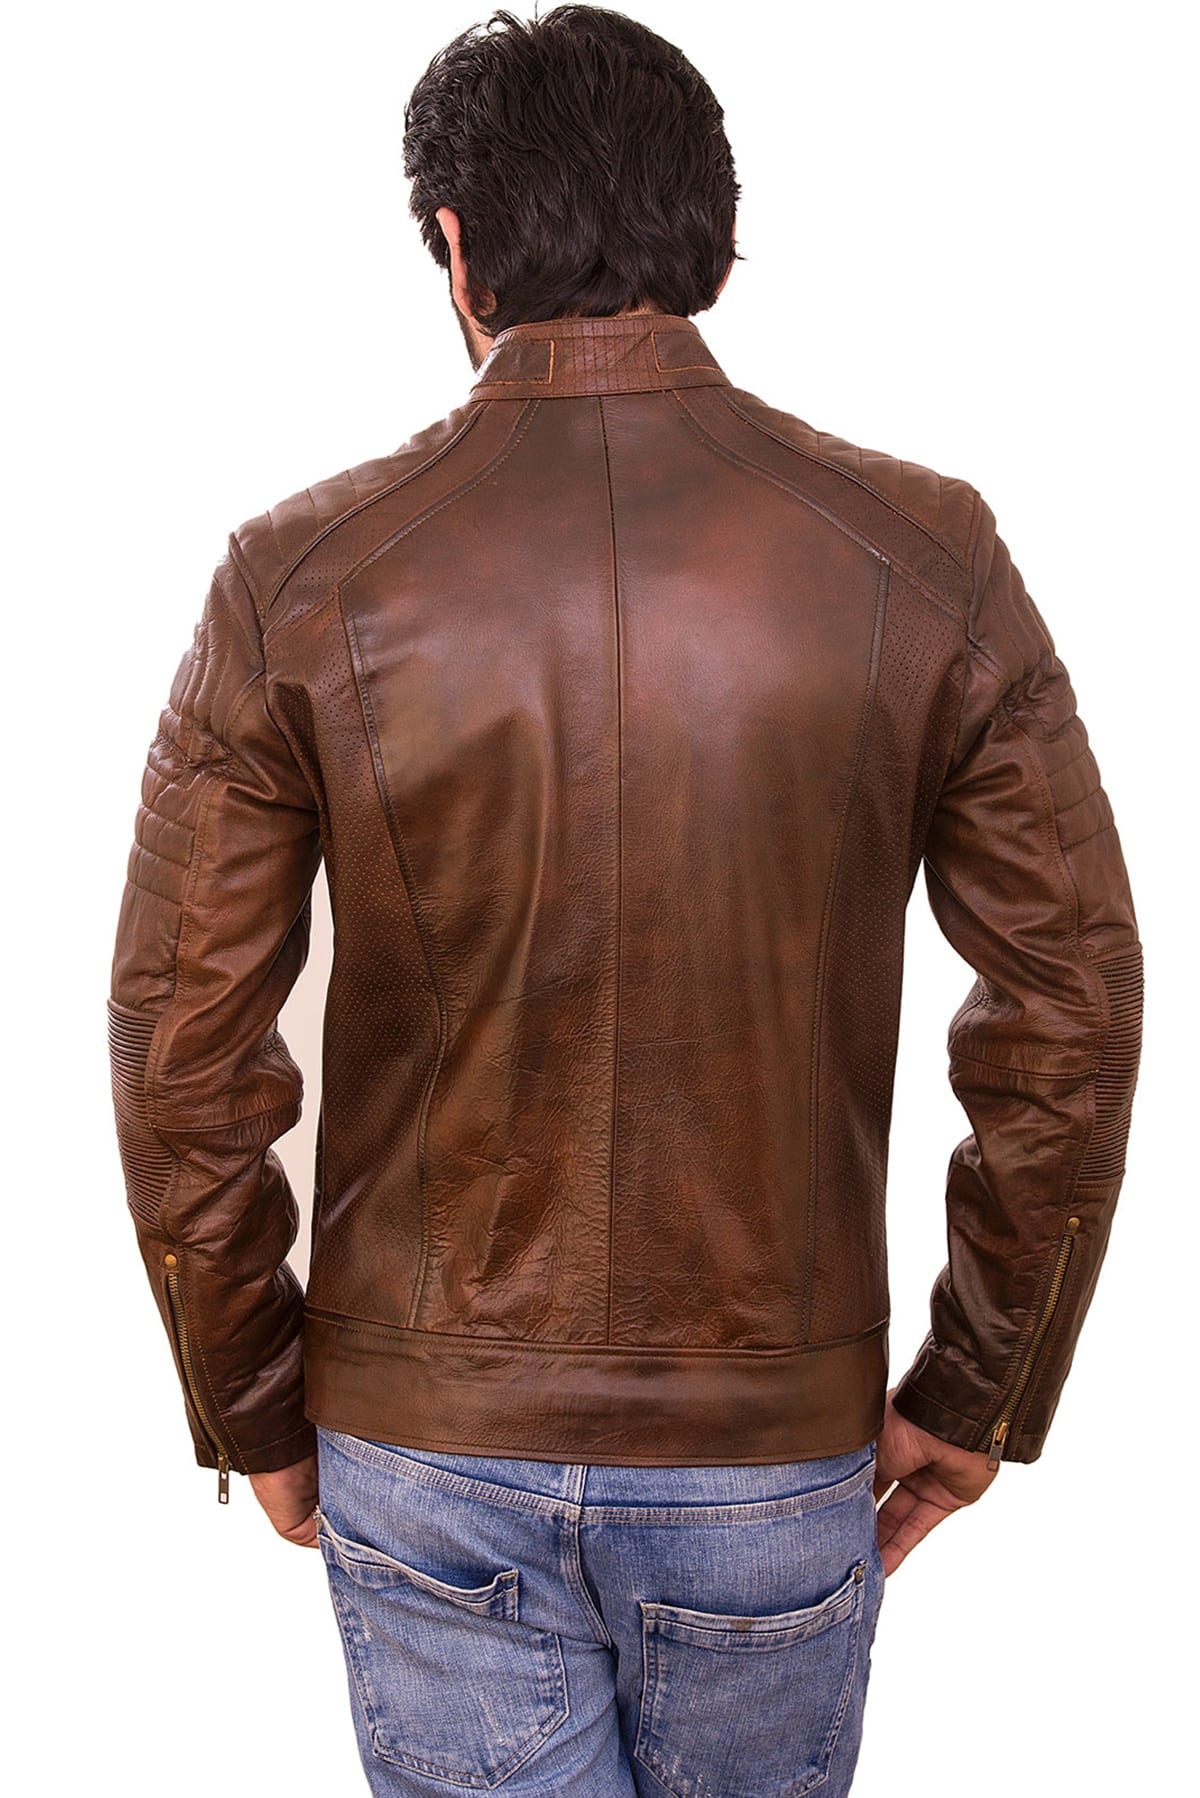 Café Racer Real Leather Jacket - Bikers Fashion in Oklahoma